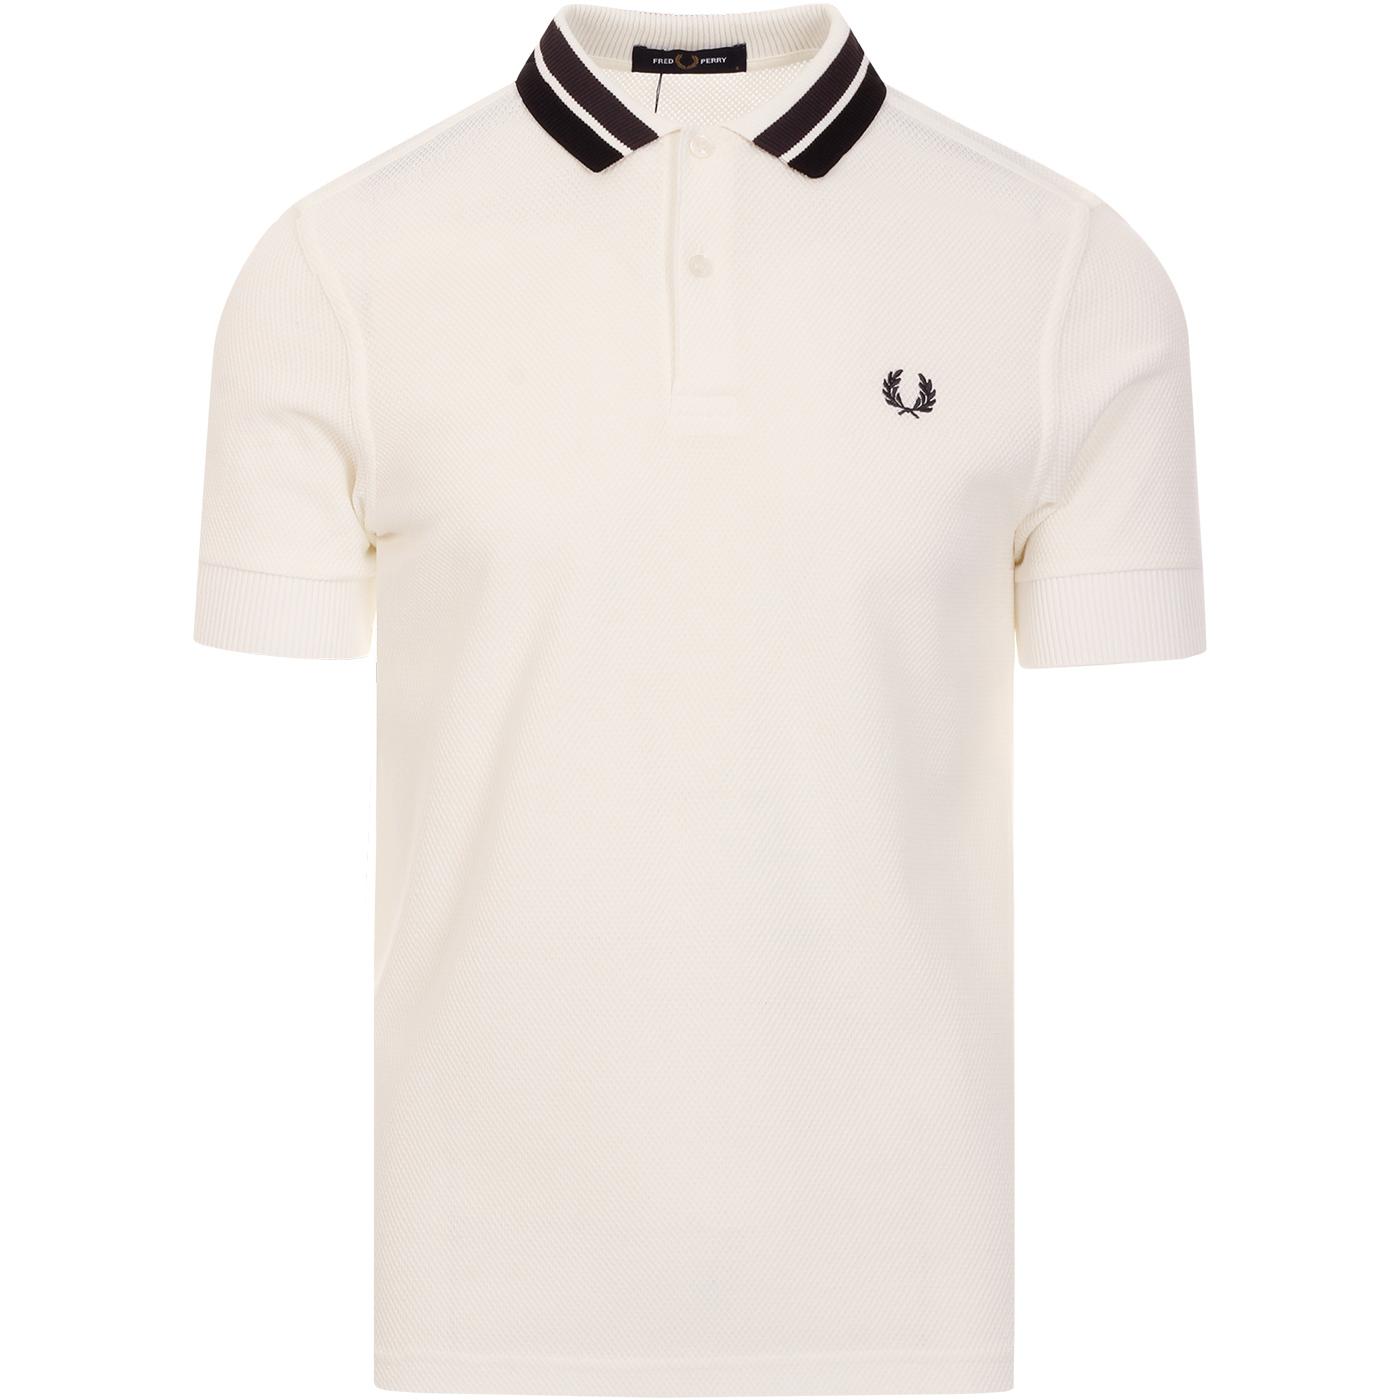 FRED PERRY Retro Mod Bold Tipped Textured Polo Top White